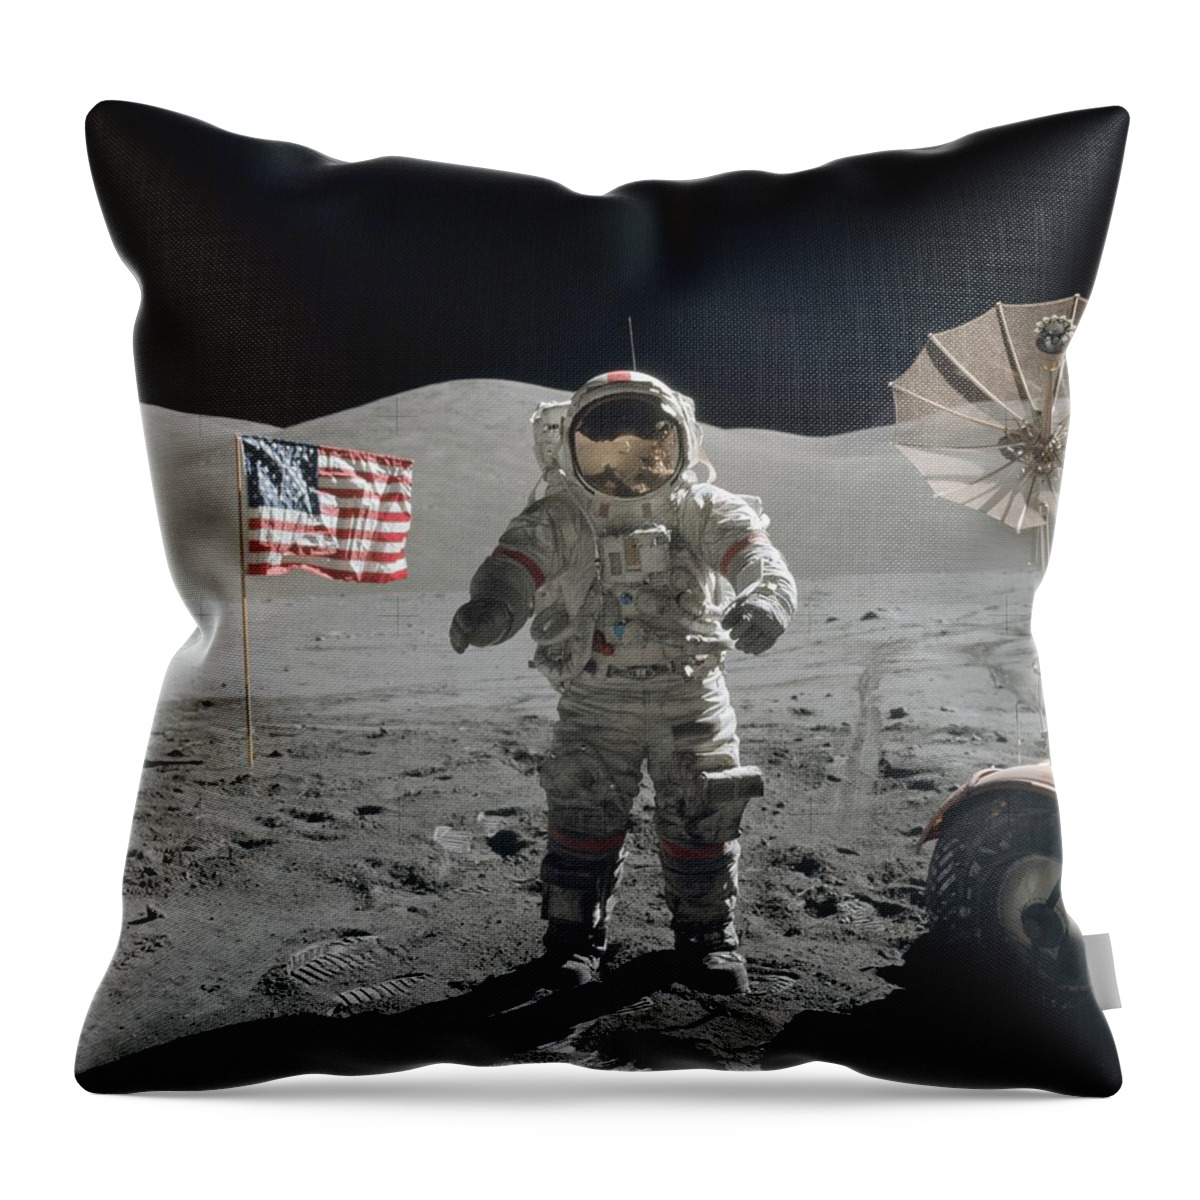 Full Moon Throw Pillow featuring the photograph Astronaut on the lunar surface by Celestial Images